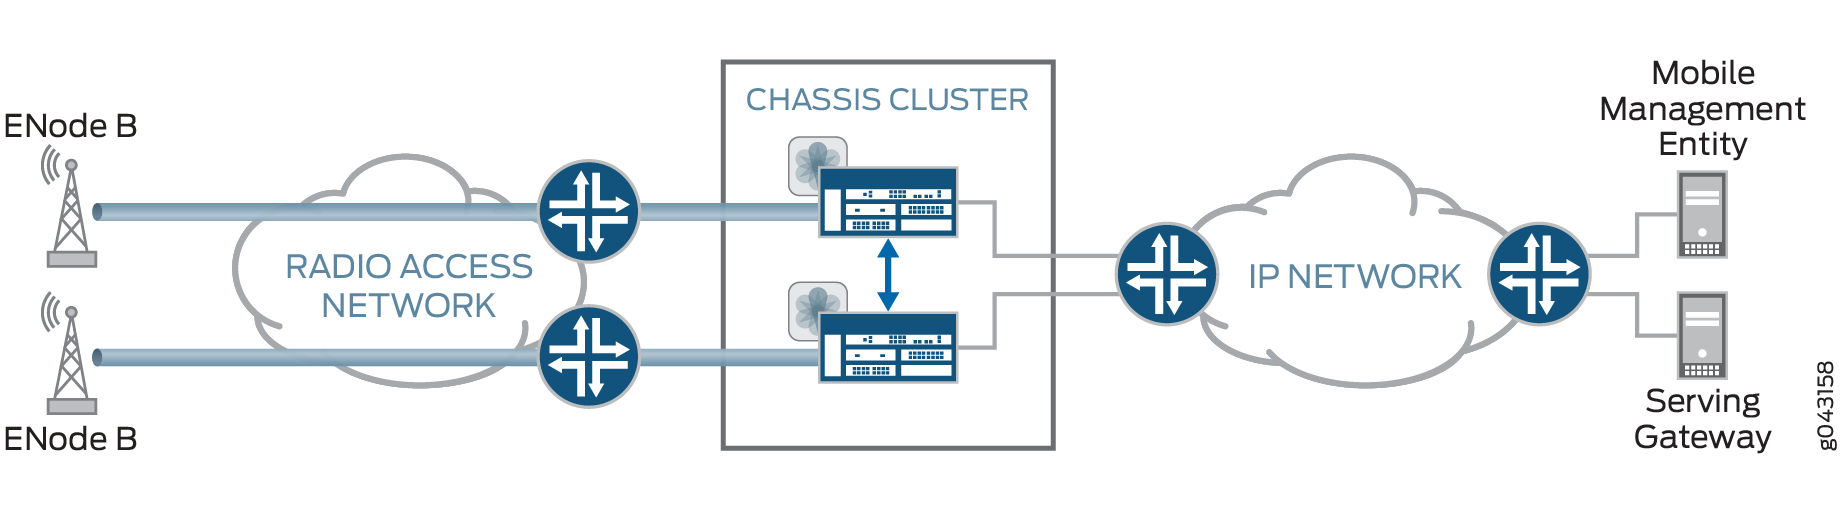 Dual Active-Backup IPsec VPN Chassis Clusters